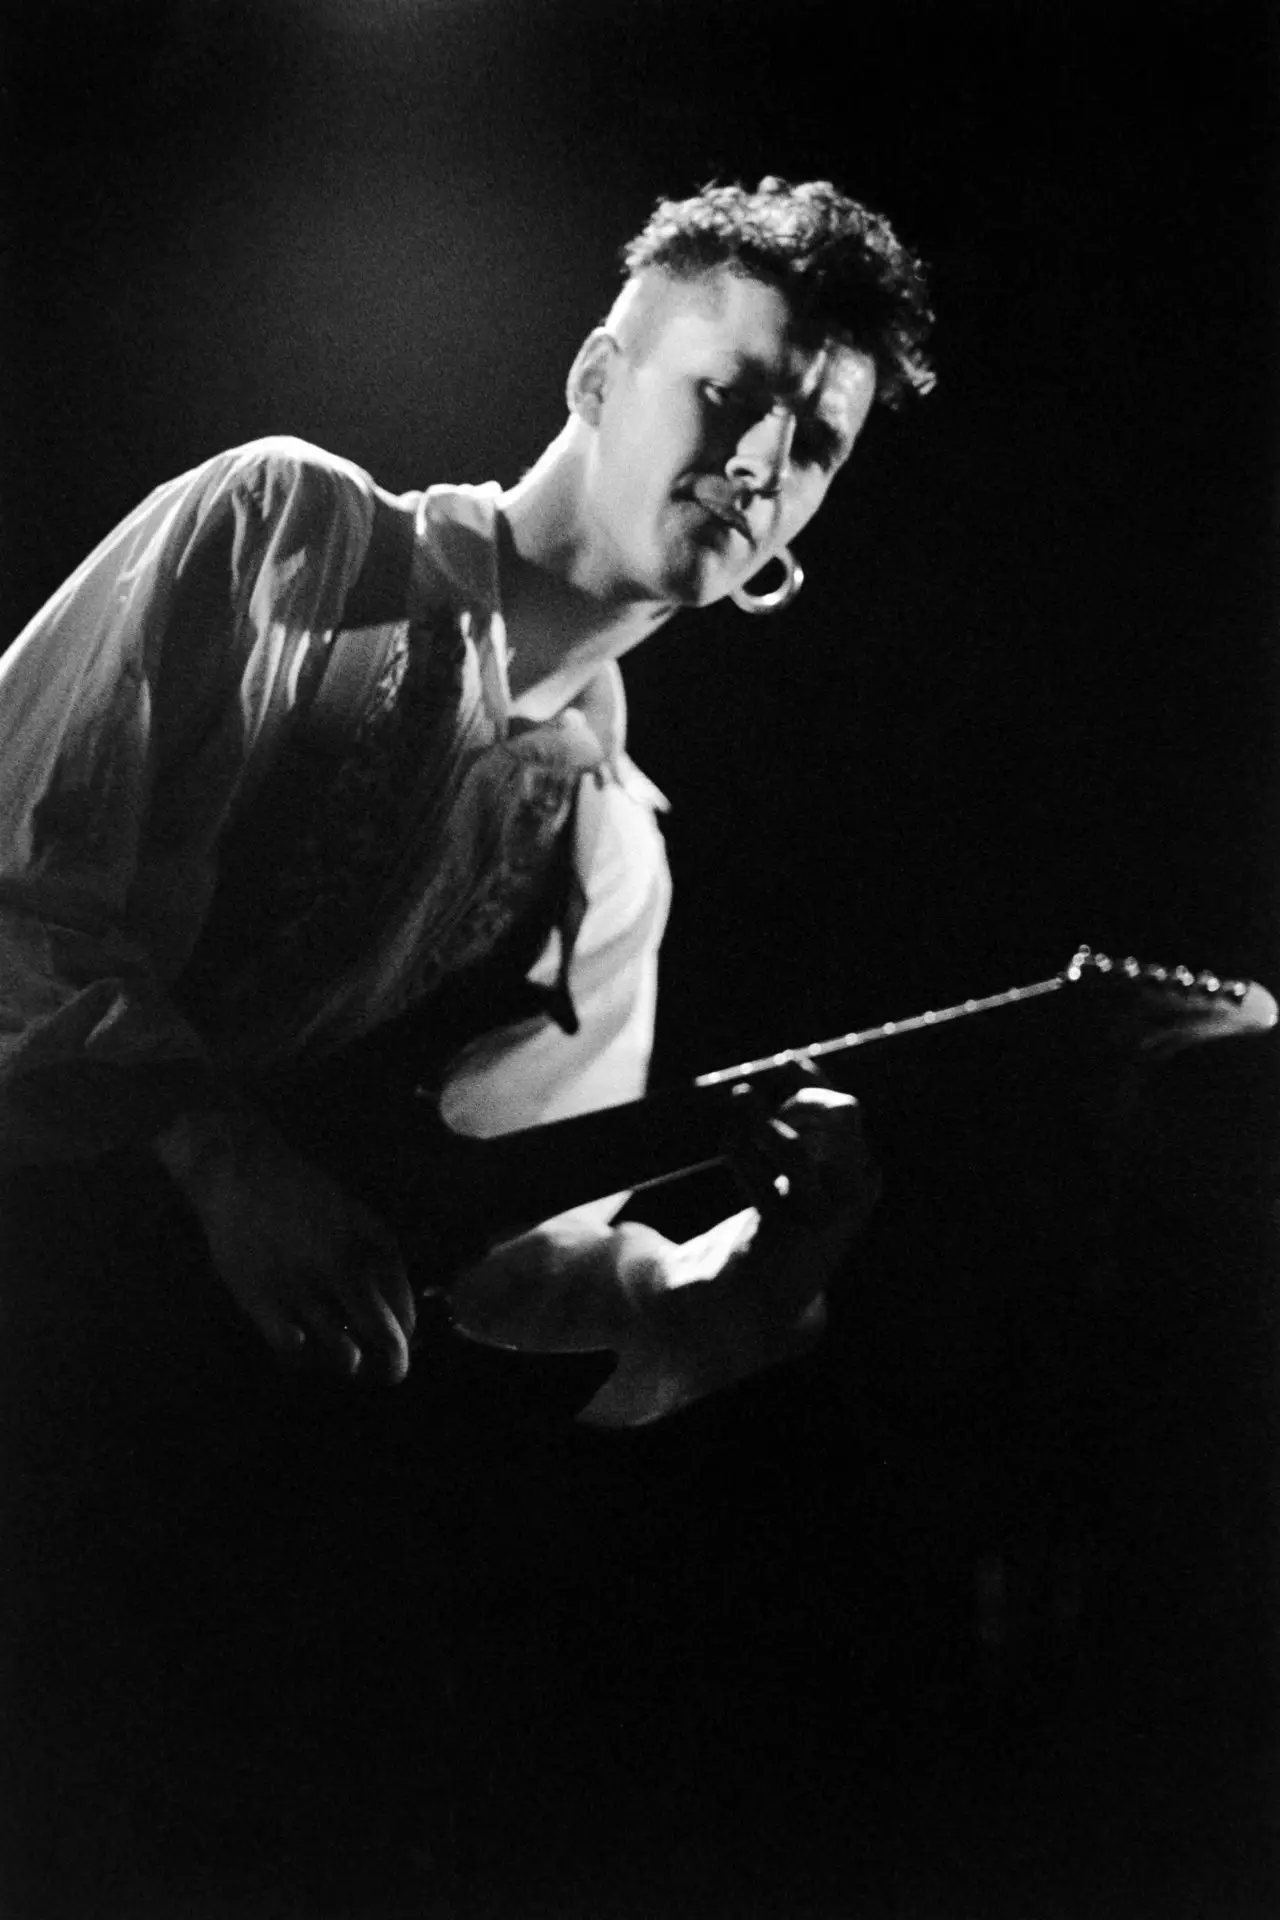 black and white image of a man playing the guitar